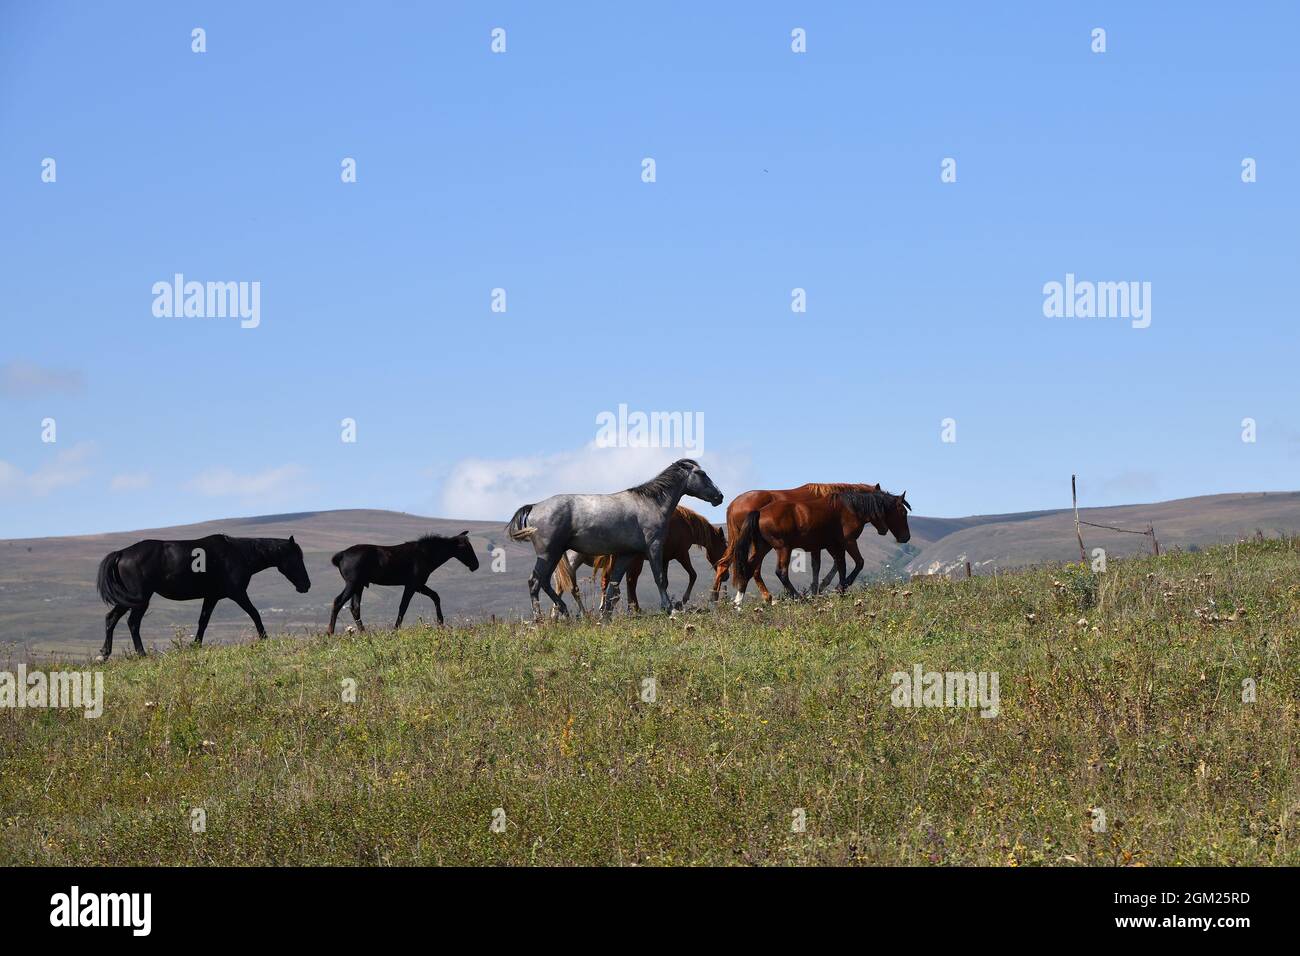 Horse herd grazing on Caucasus alpine meadow in mountains in Chechnya, Russia. Vedeno district of the Chechen Republic Stock Photo